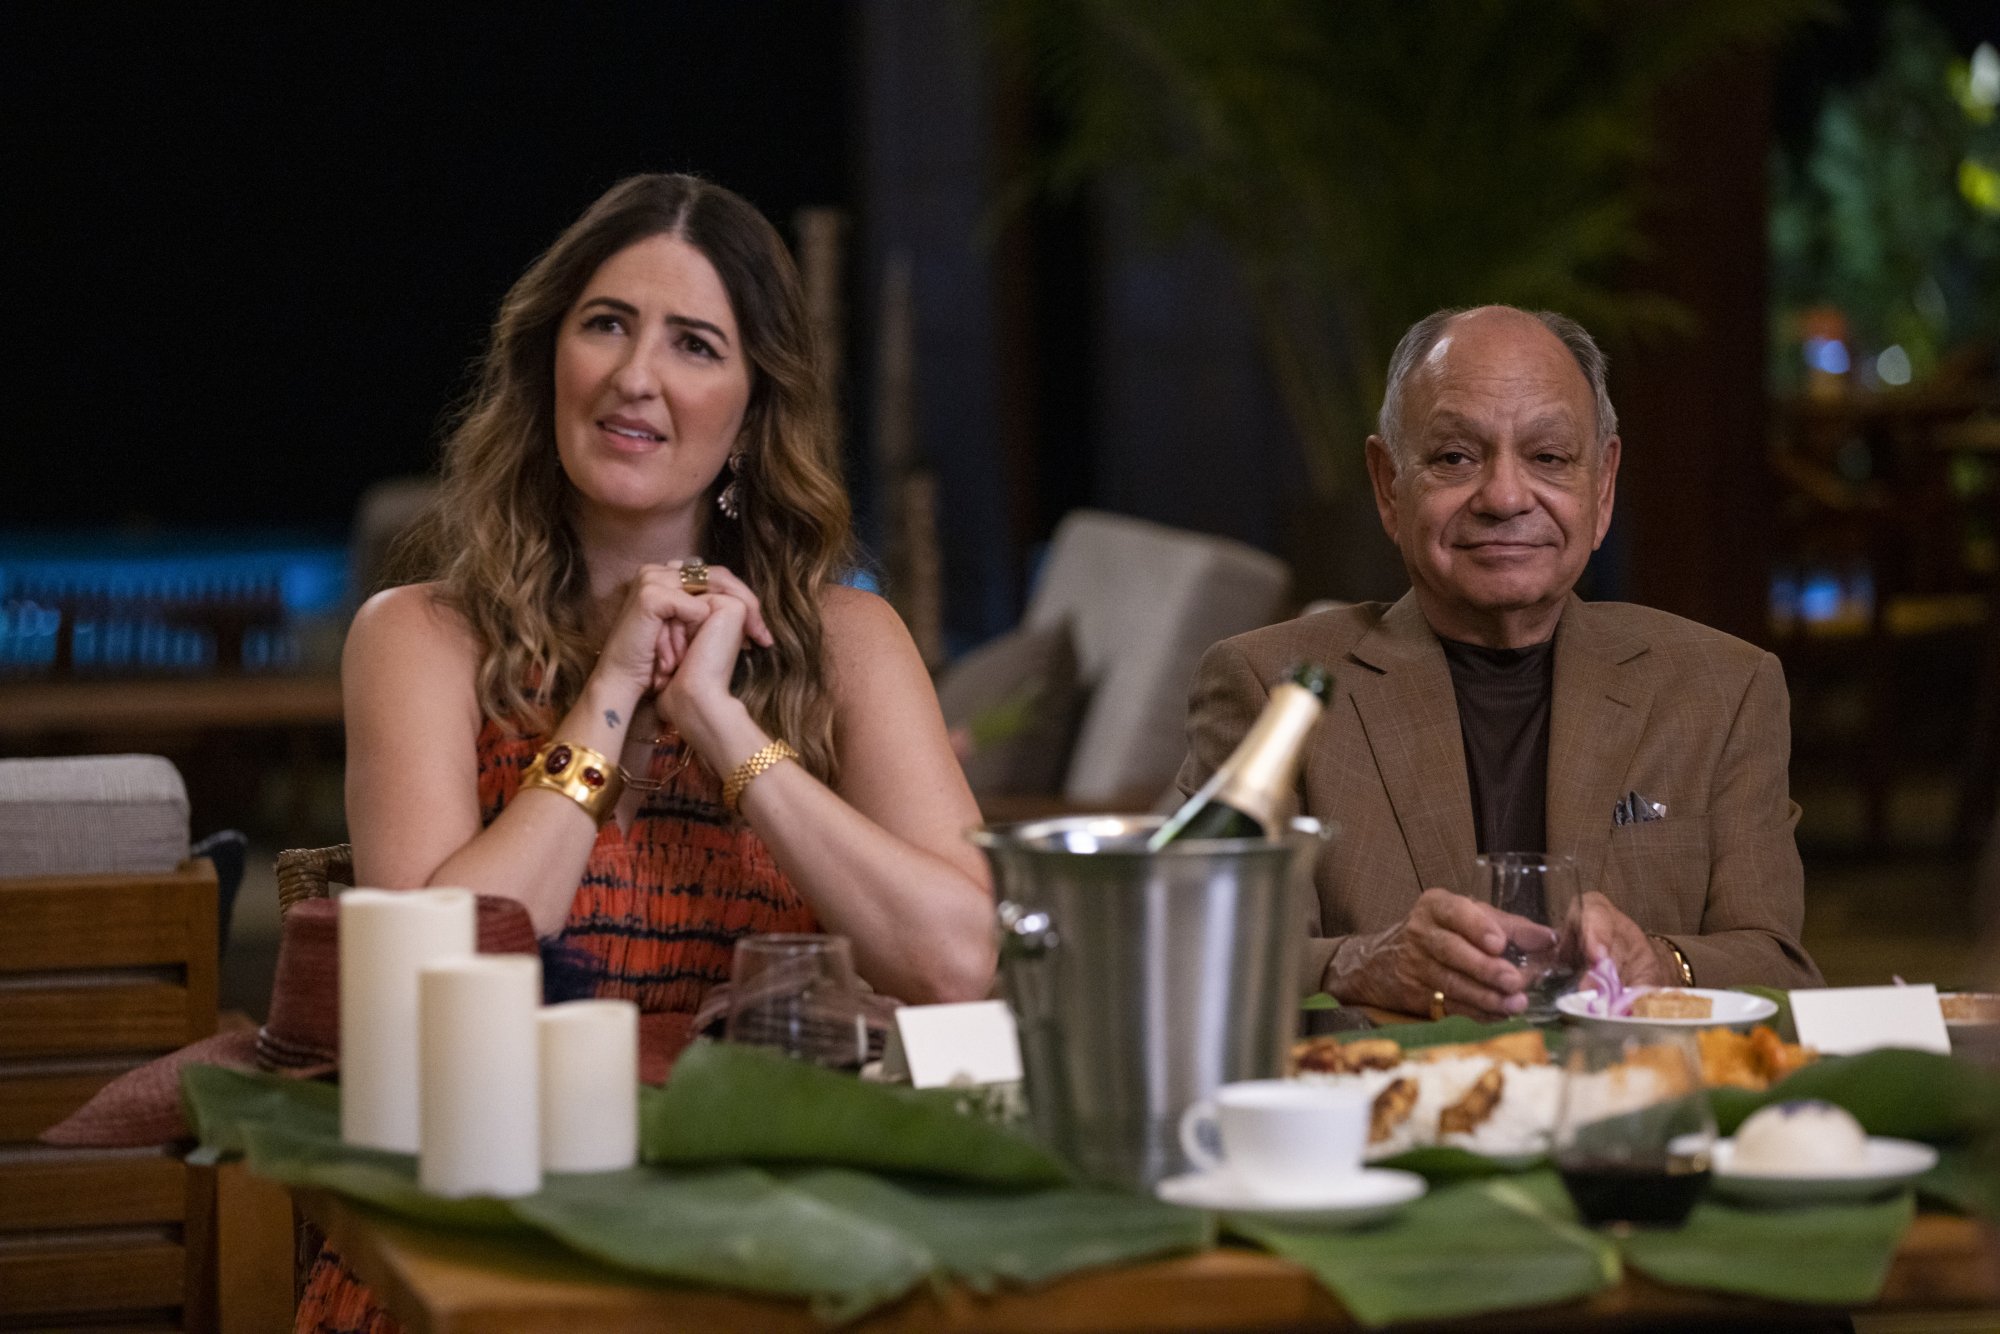 D'Arcy Carden and Cheech Marin sit at a table.